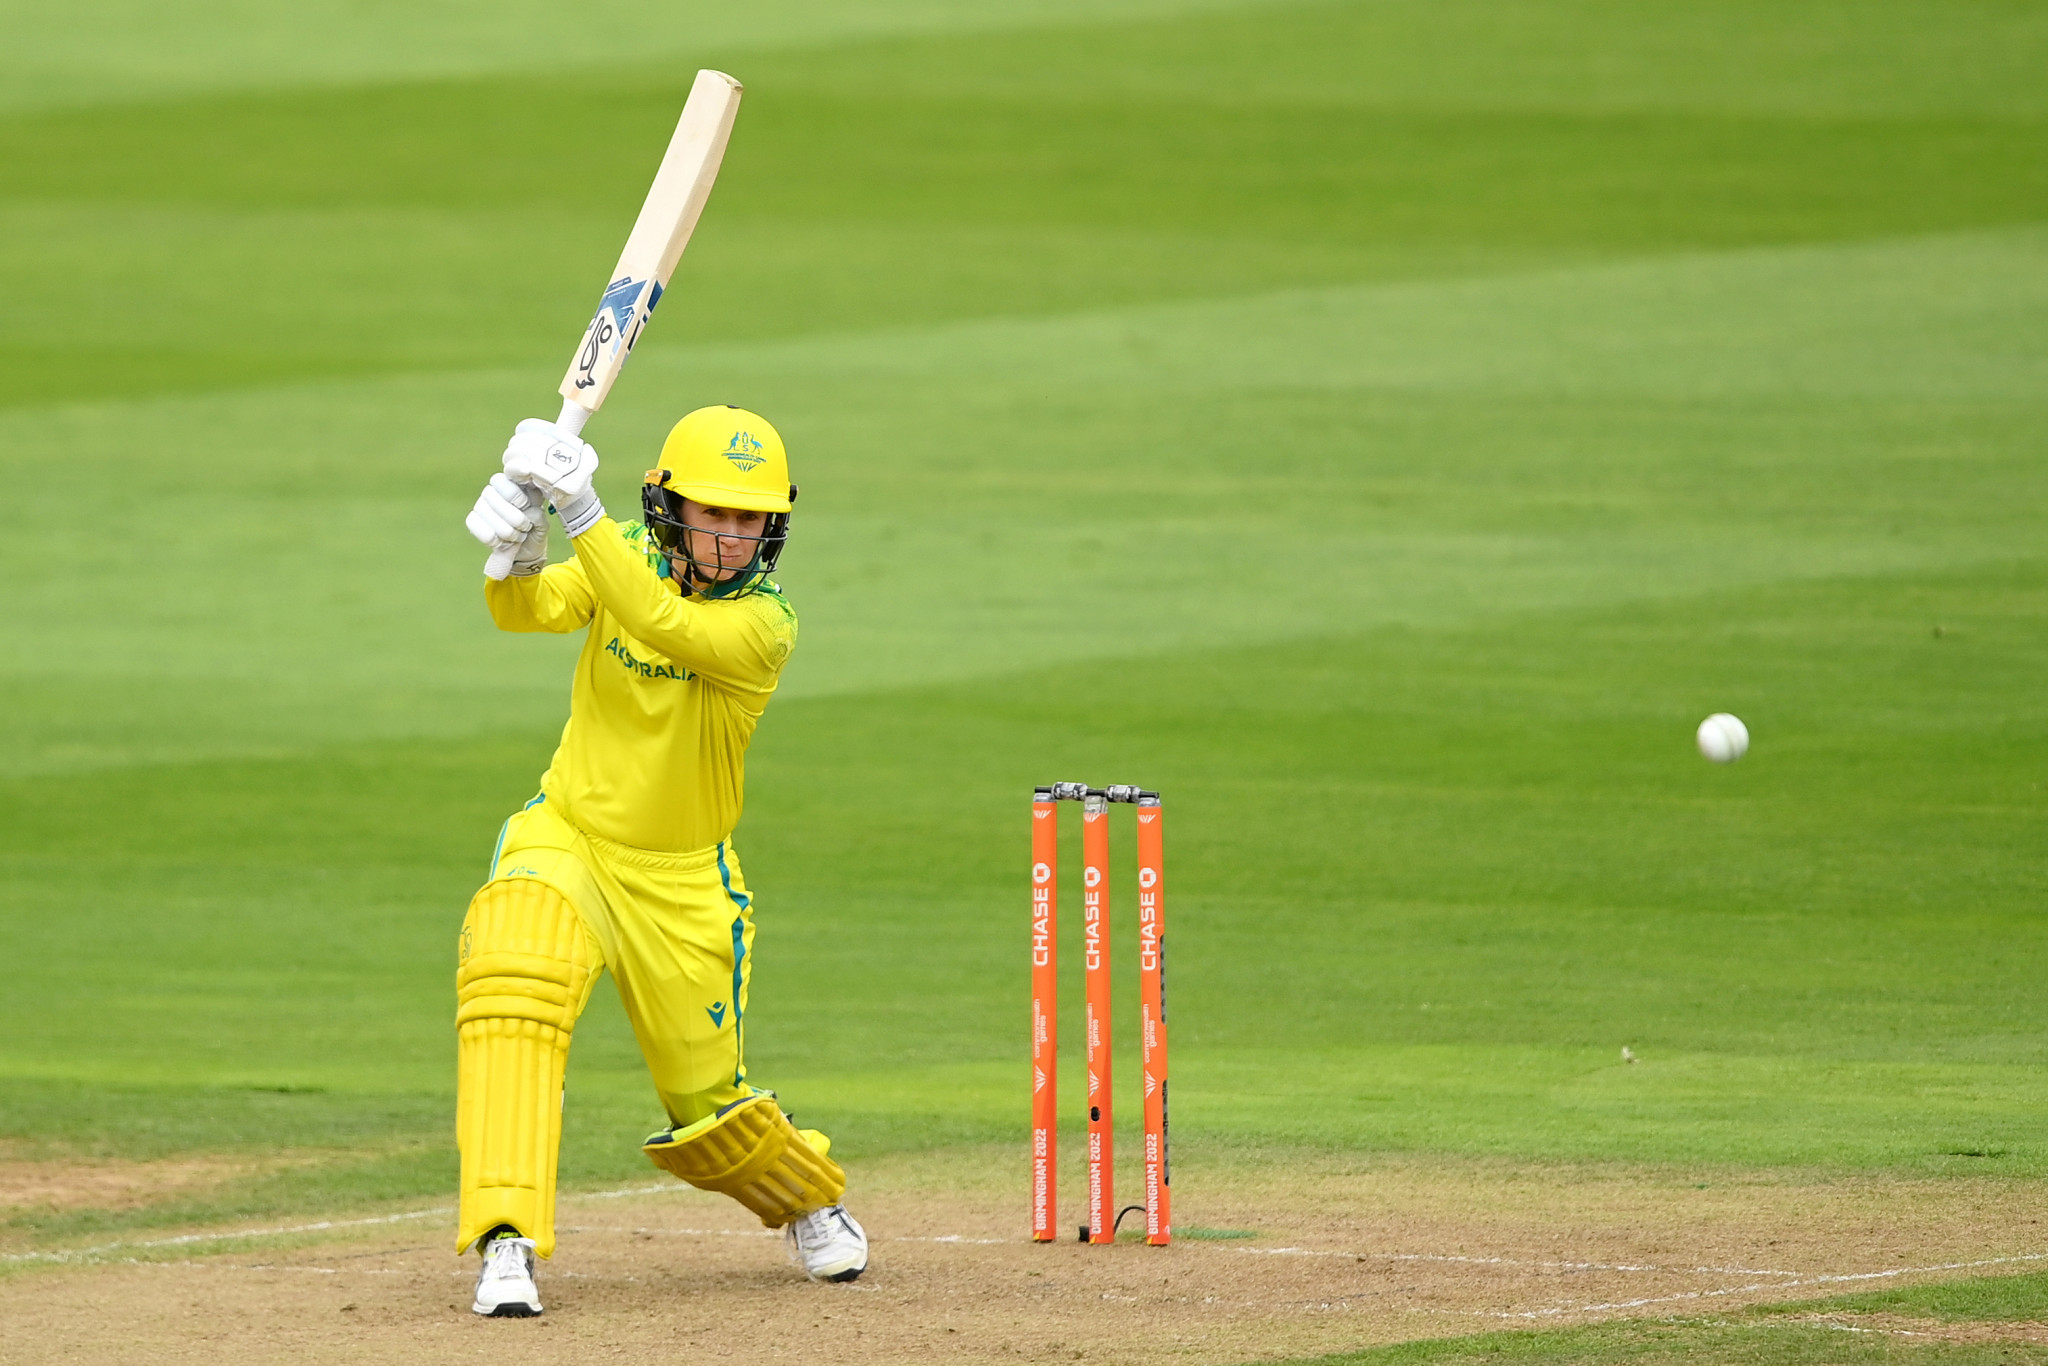 Australian great Rachael Haynes retired from cricket following the Birmingham 2022 Commonwealth Games ©Getty Images